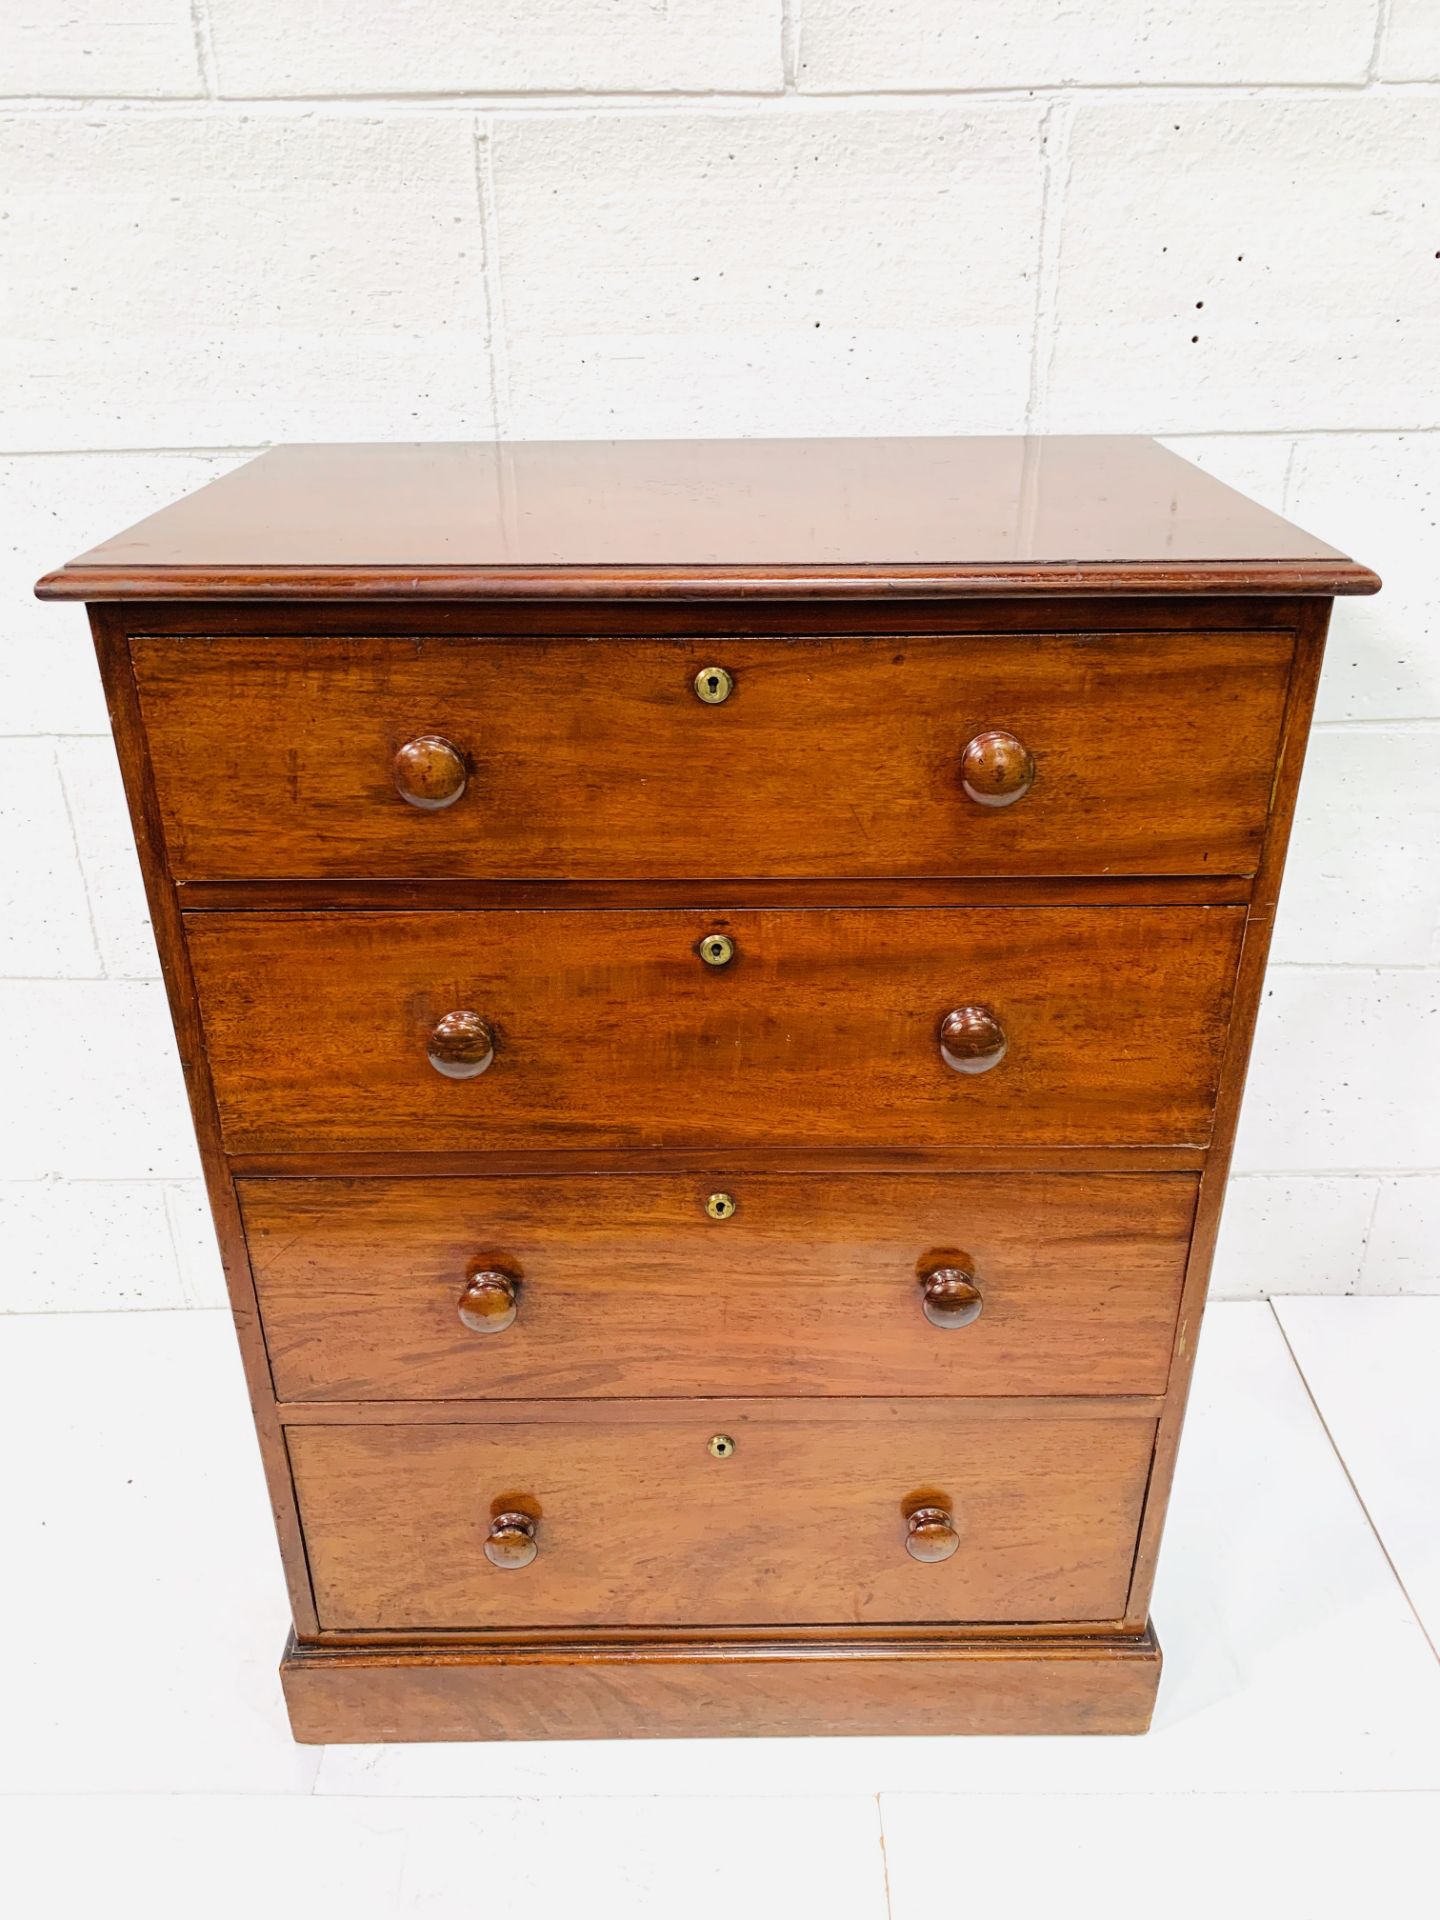 Mahogany chest of four graduated drawers by Spillman and Co. - Image 8 of 8